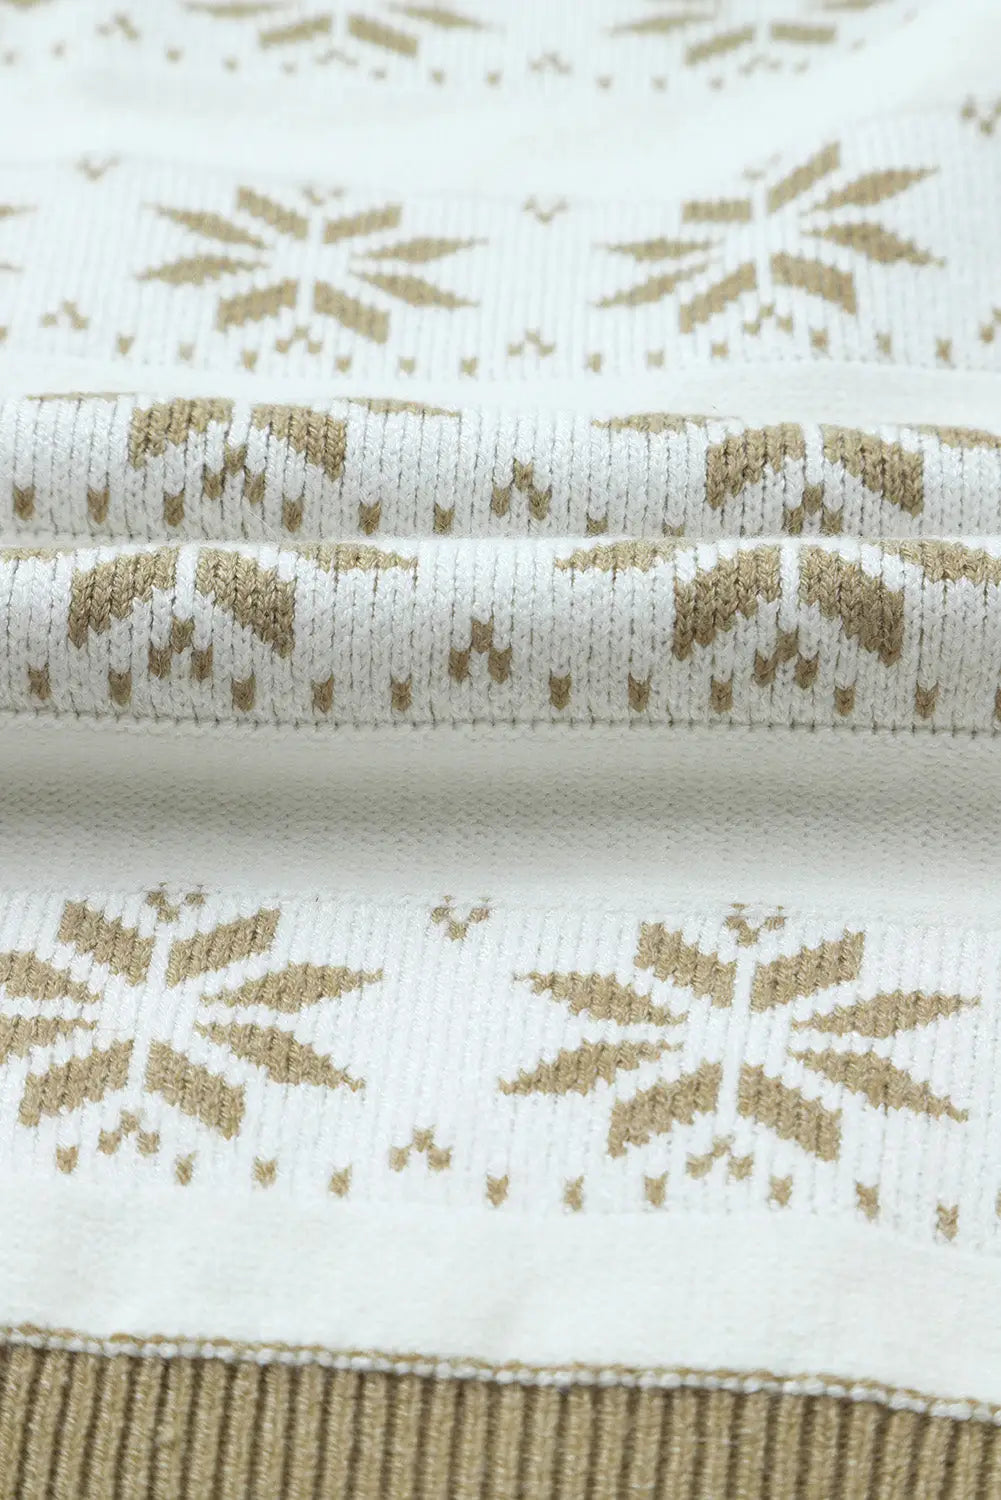 White christmas snowflake high neck knit sweater - sweaters & cardigans